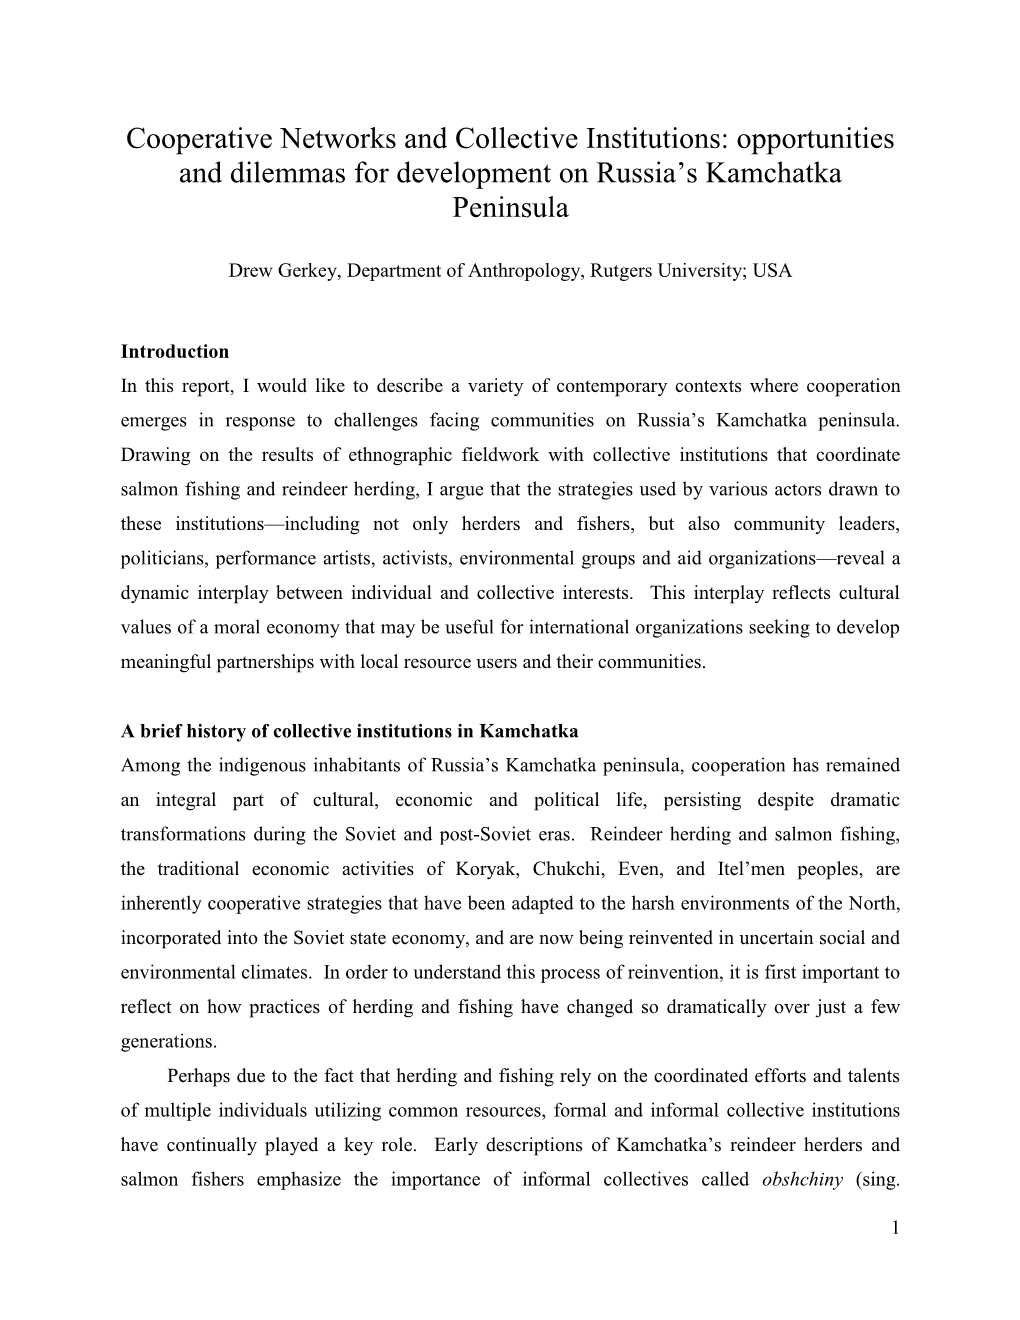 Cooperative Networks and Collective Institutions: Opportunities and Dilemmas for Development on Russia’S Kamchatka Peninsula